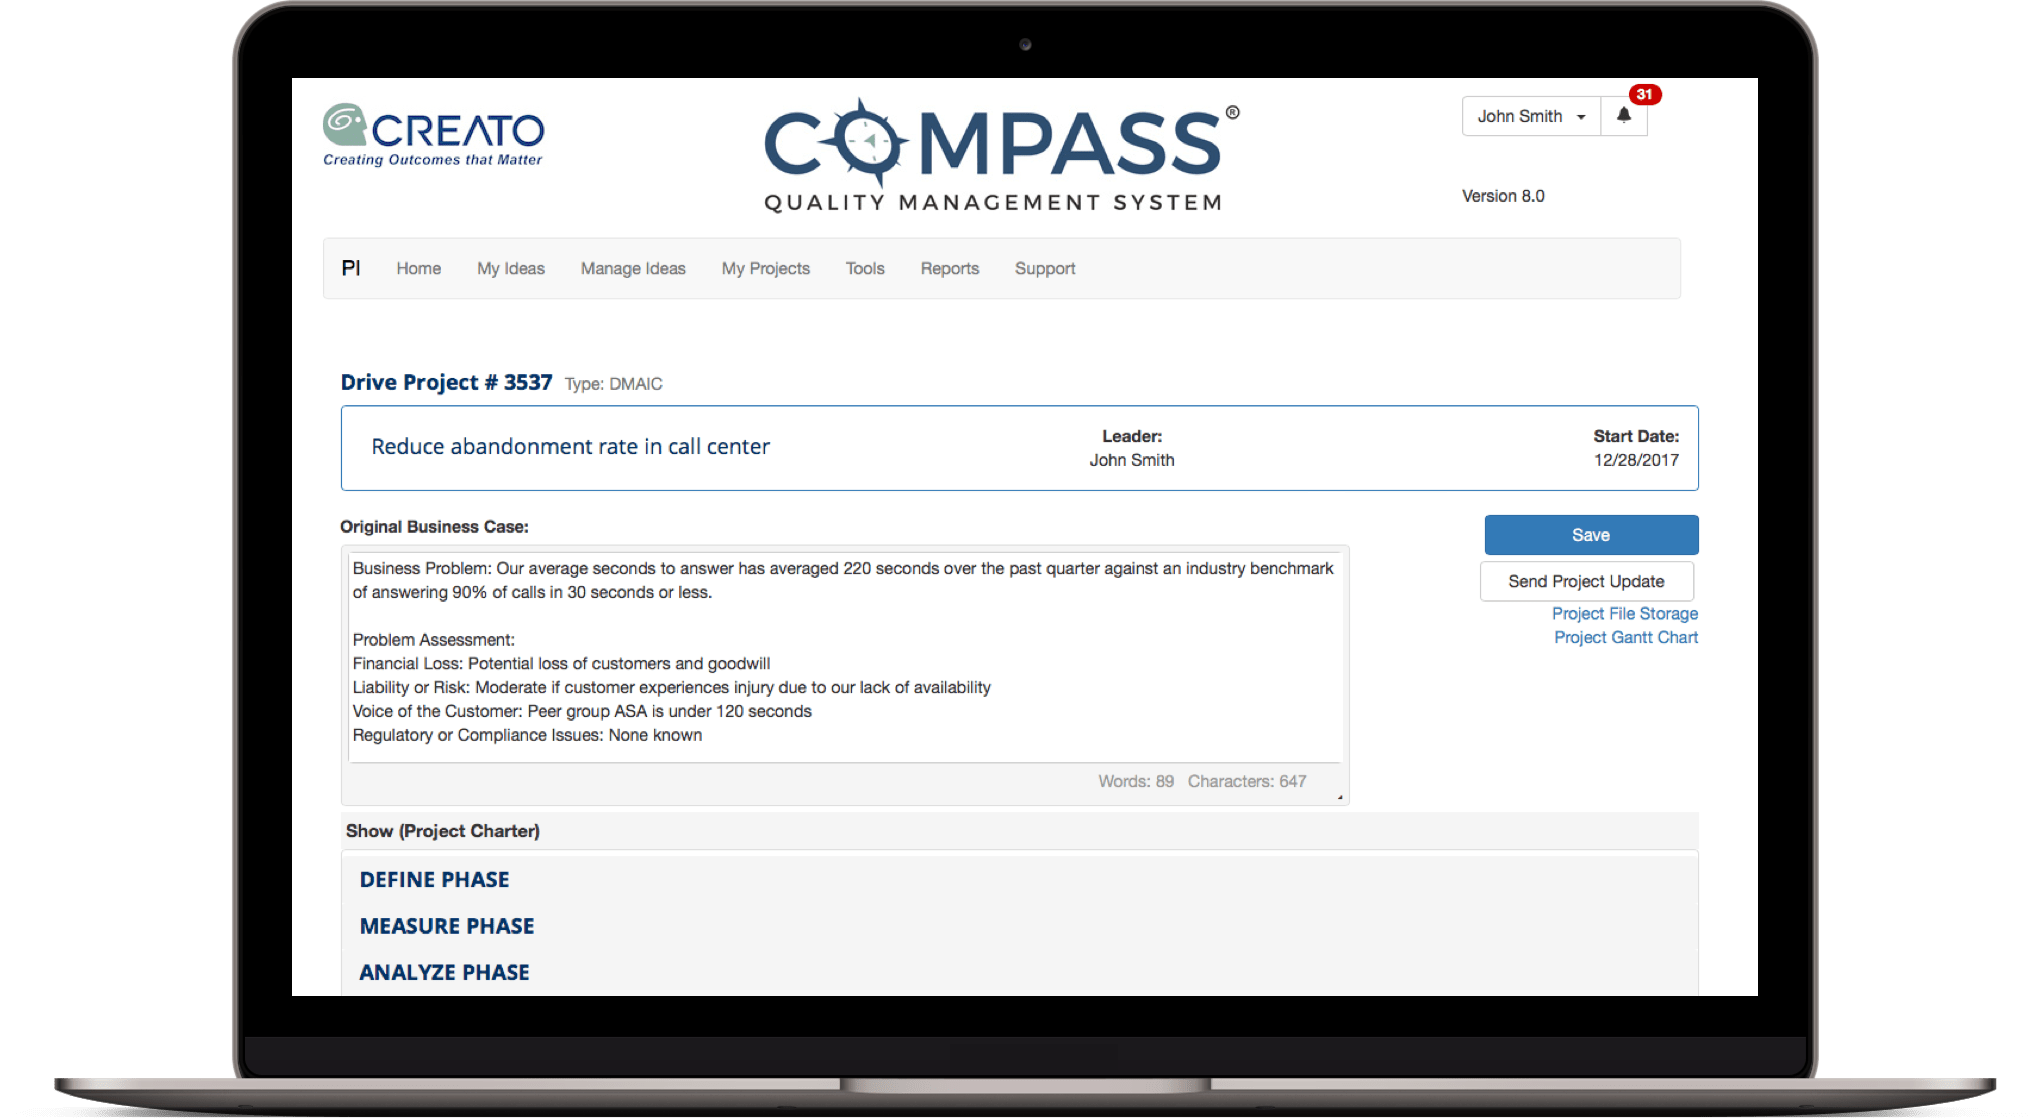 Screenshot of Compass Quality Management System  drive project screen